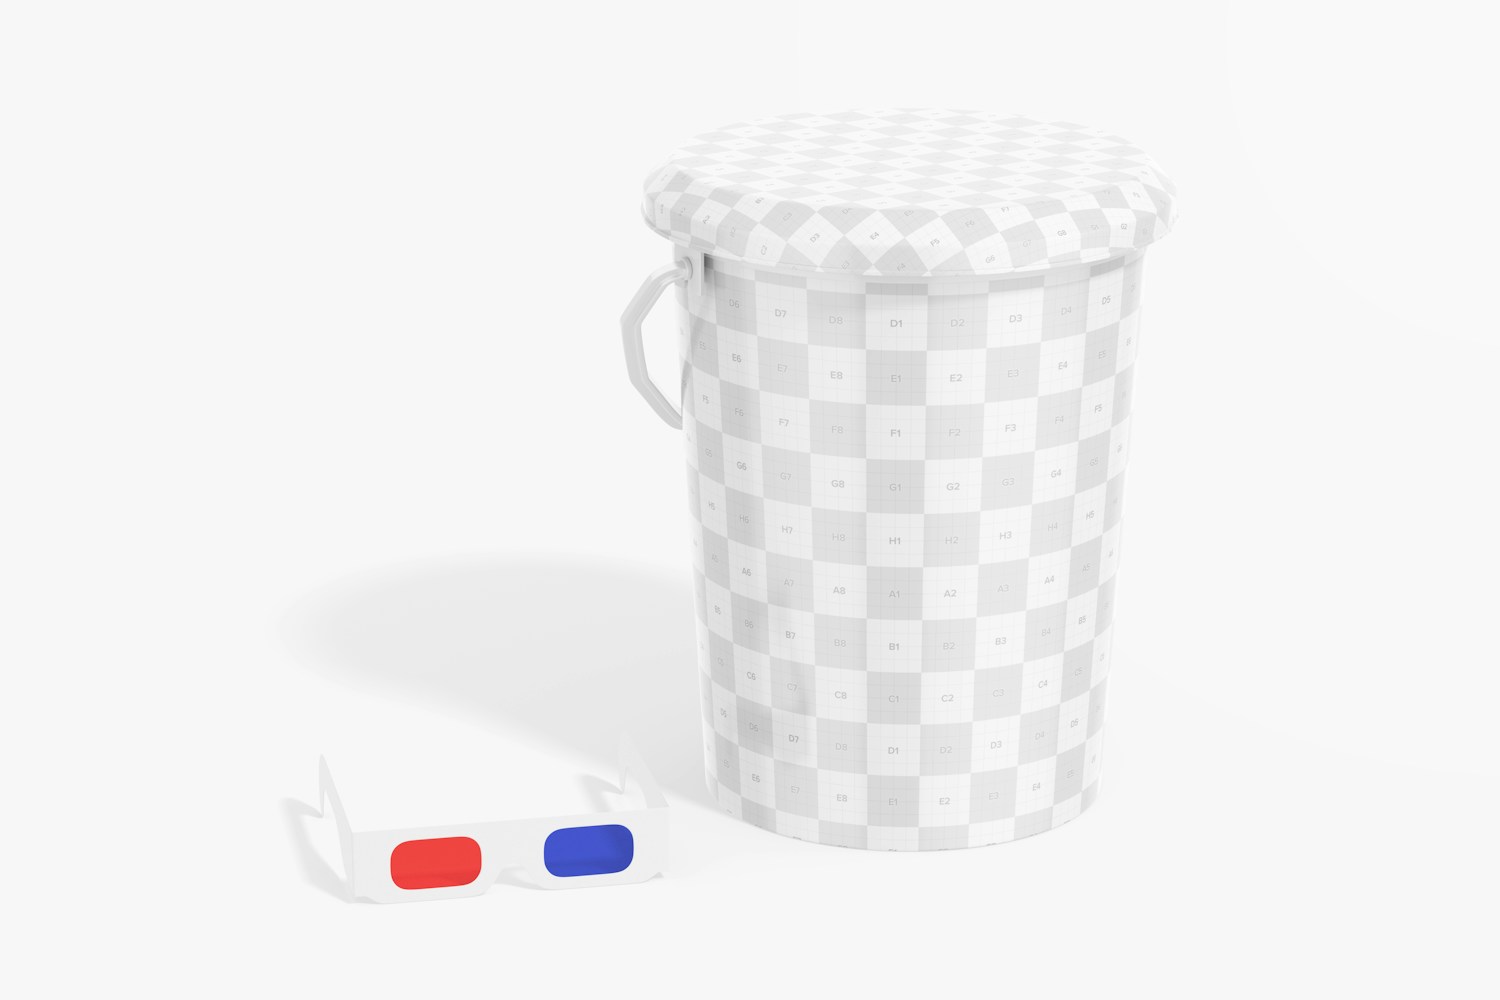 Popcorn Bucket with Lid Mockup, with Glasses